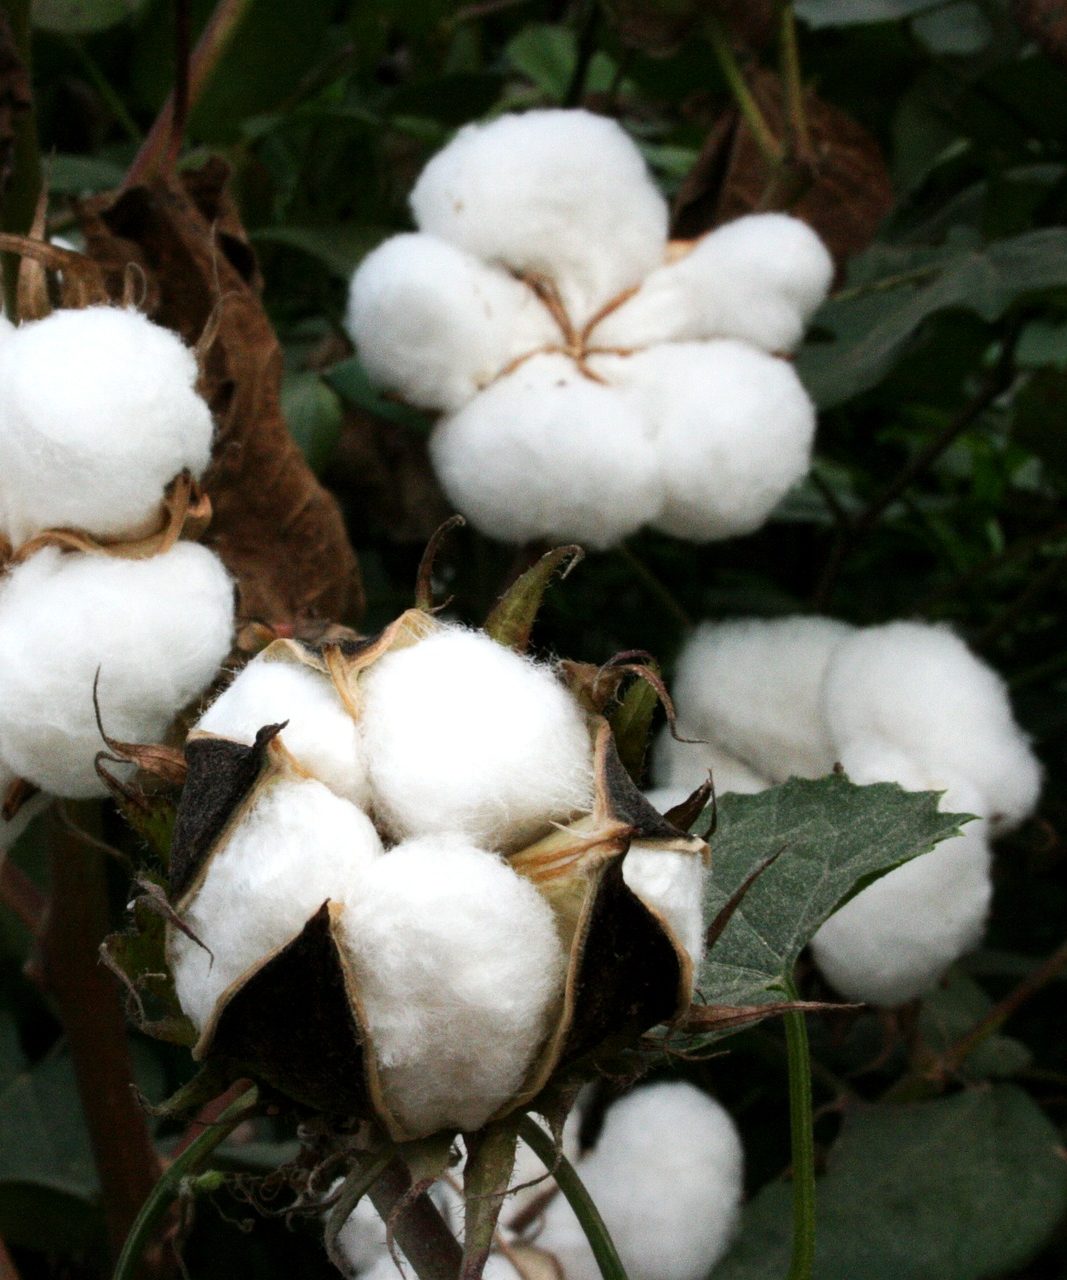 cotton plant with dark green leaves and clean white cotton buds 